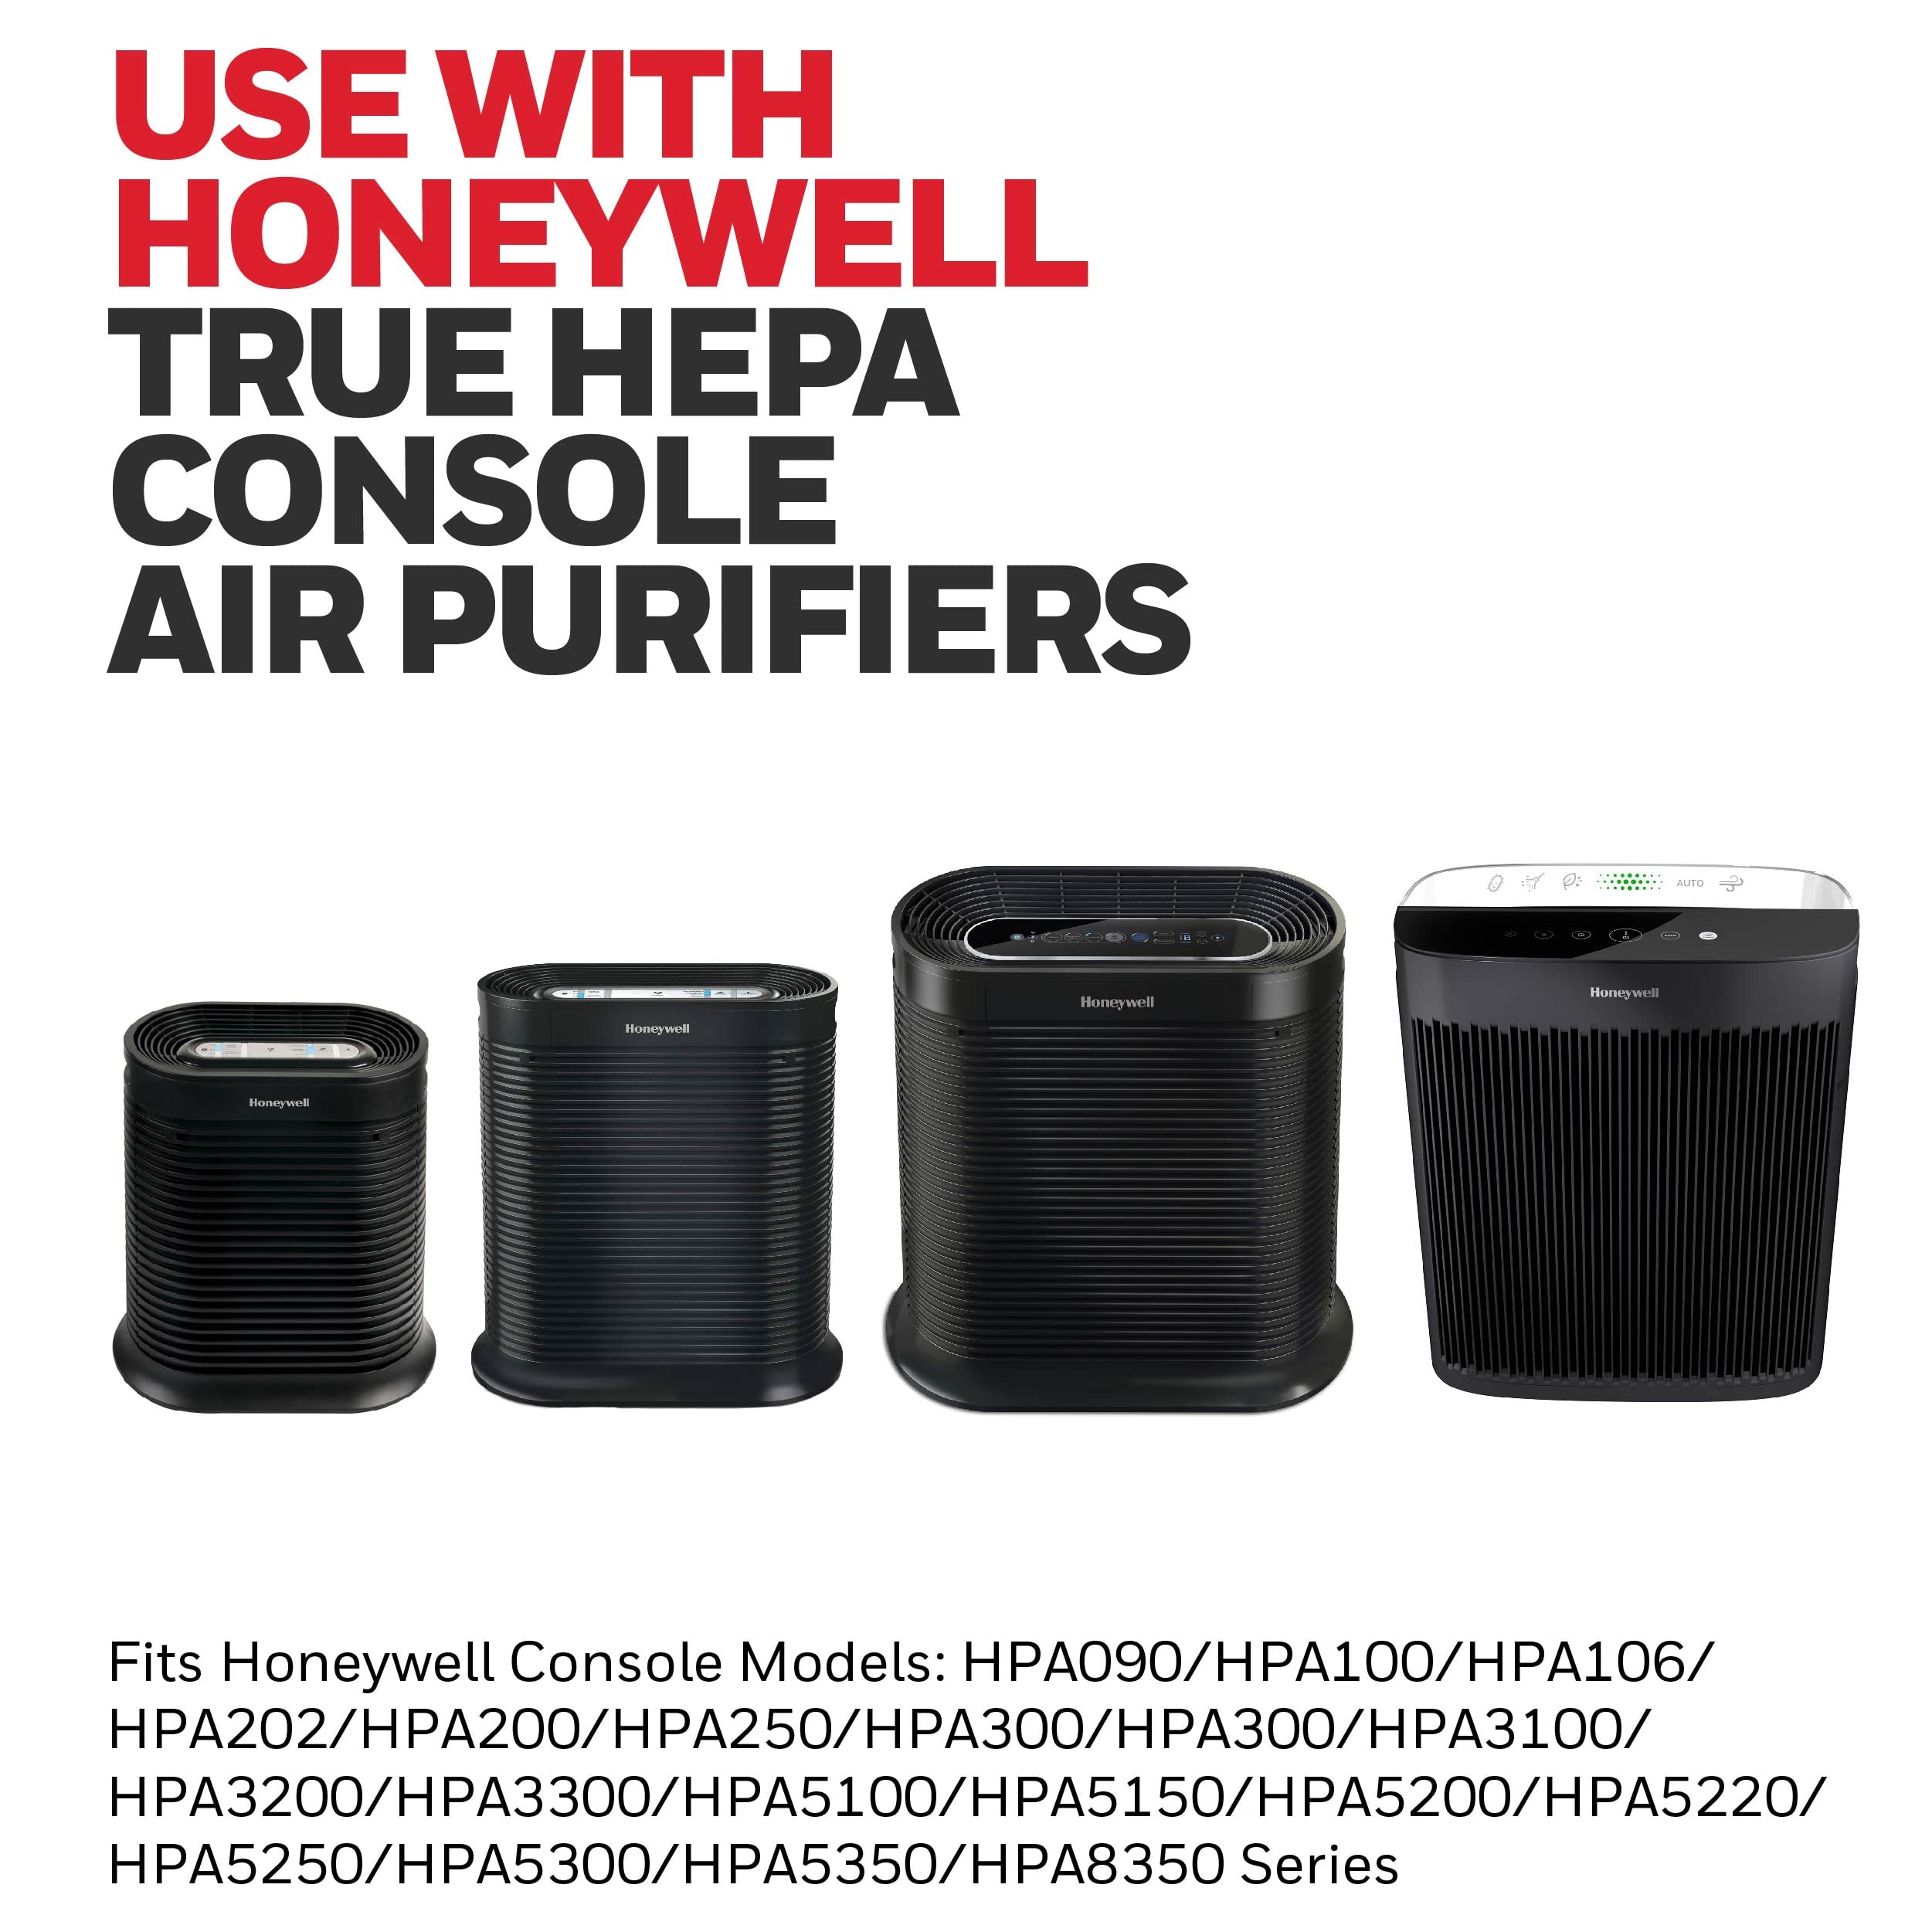 Honeywell HEPA Air Purifier Filter R, 2-Pack for HPA 100/200/300 and 5000 Series - Airborne Allergen Air Filter Targets Wildfire/Smoke, Pollen, Pet Dander, and Dust